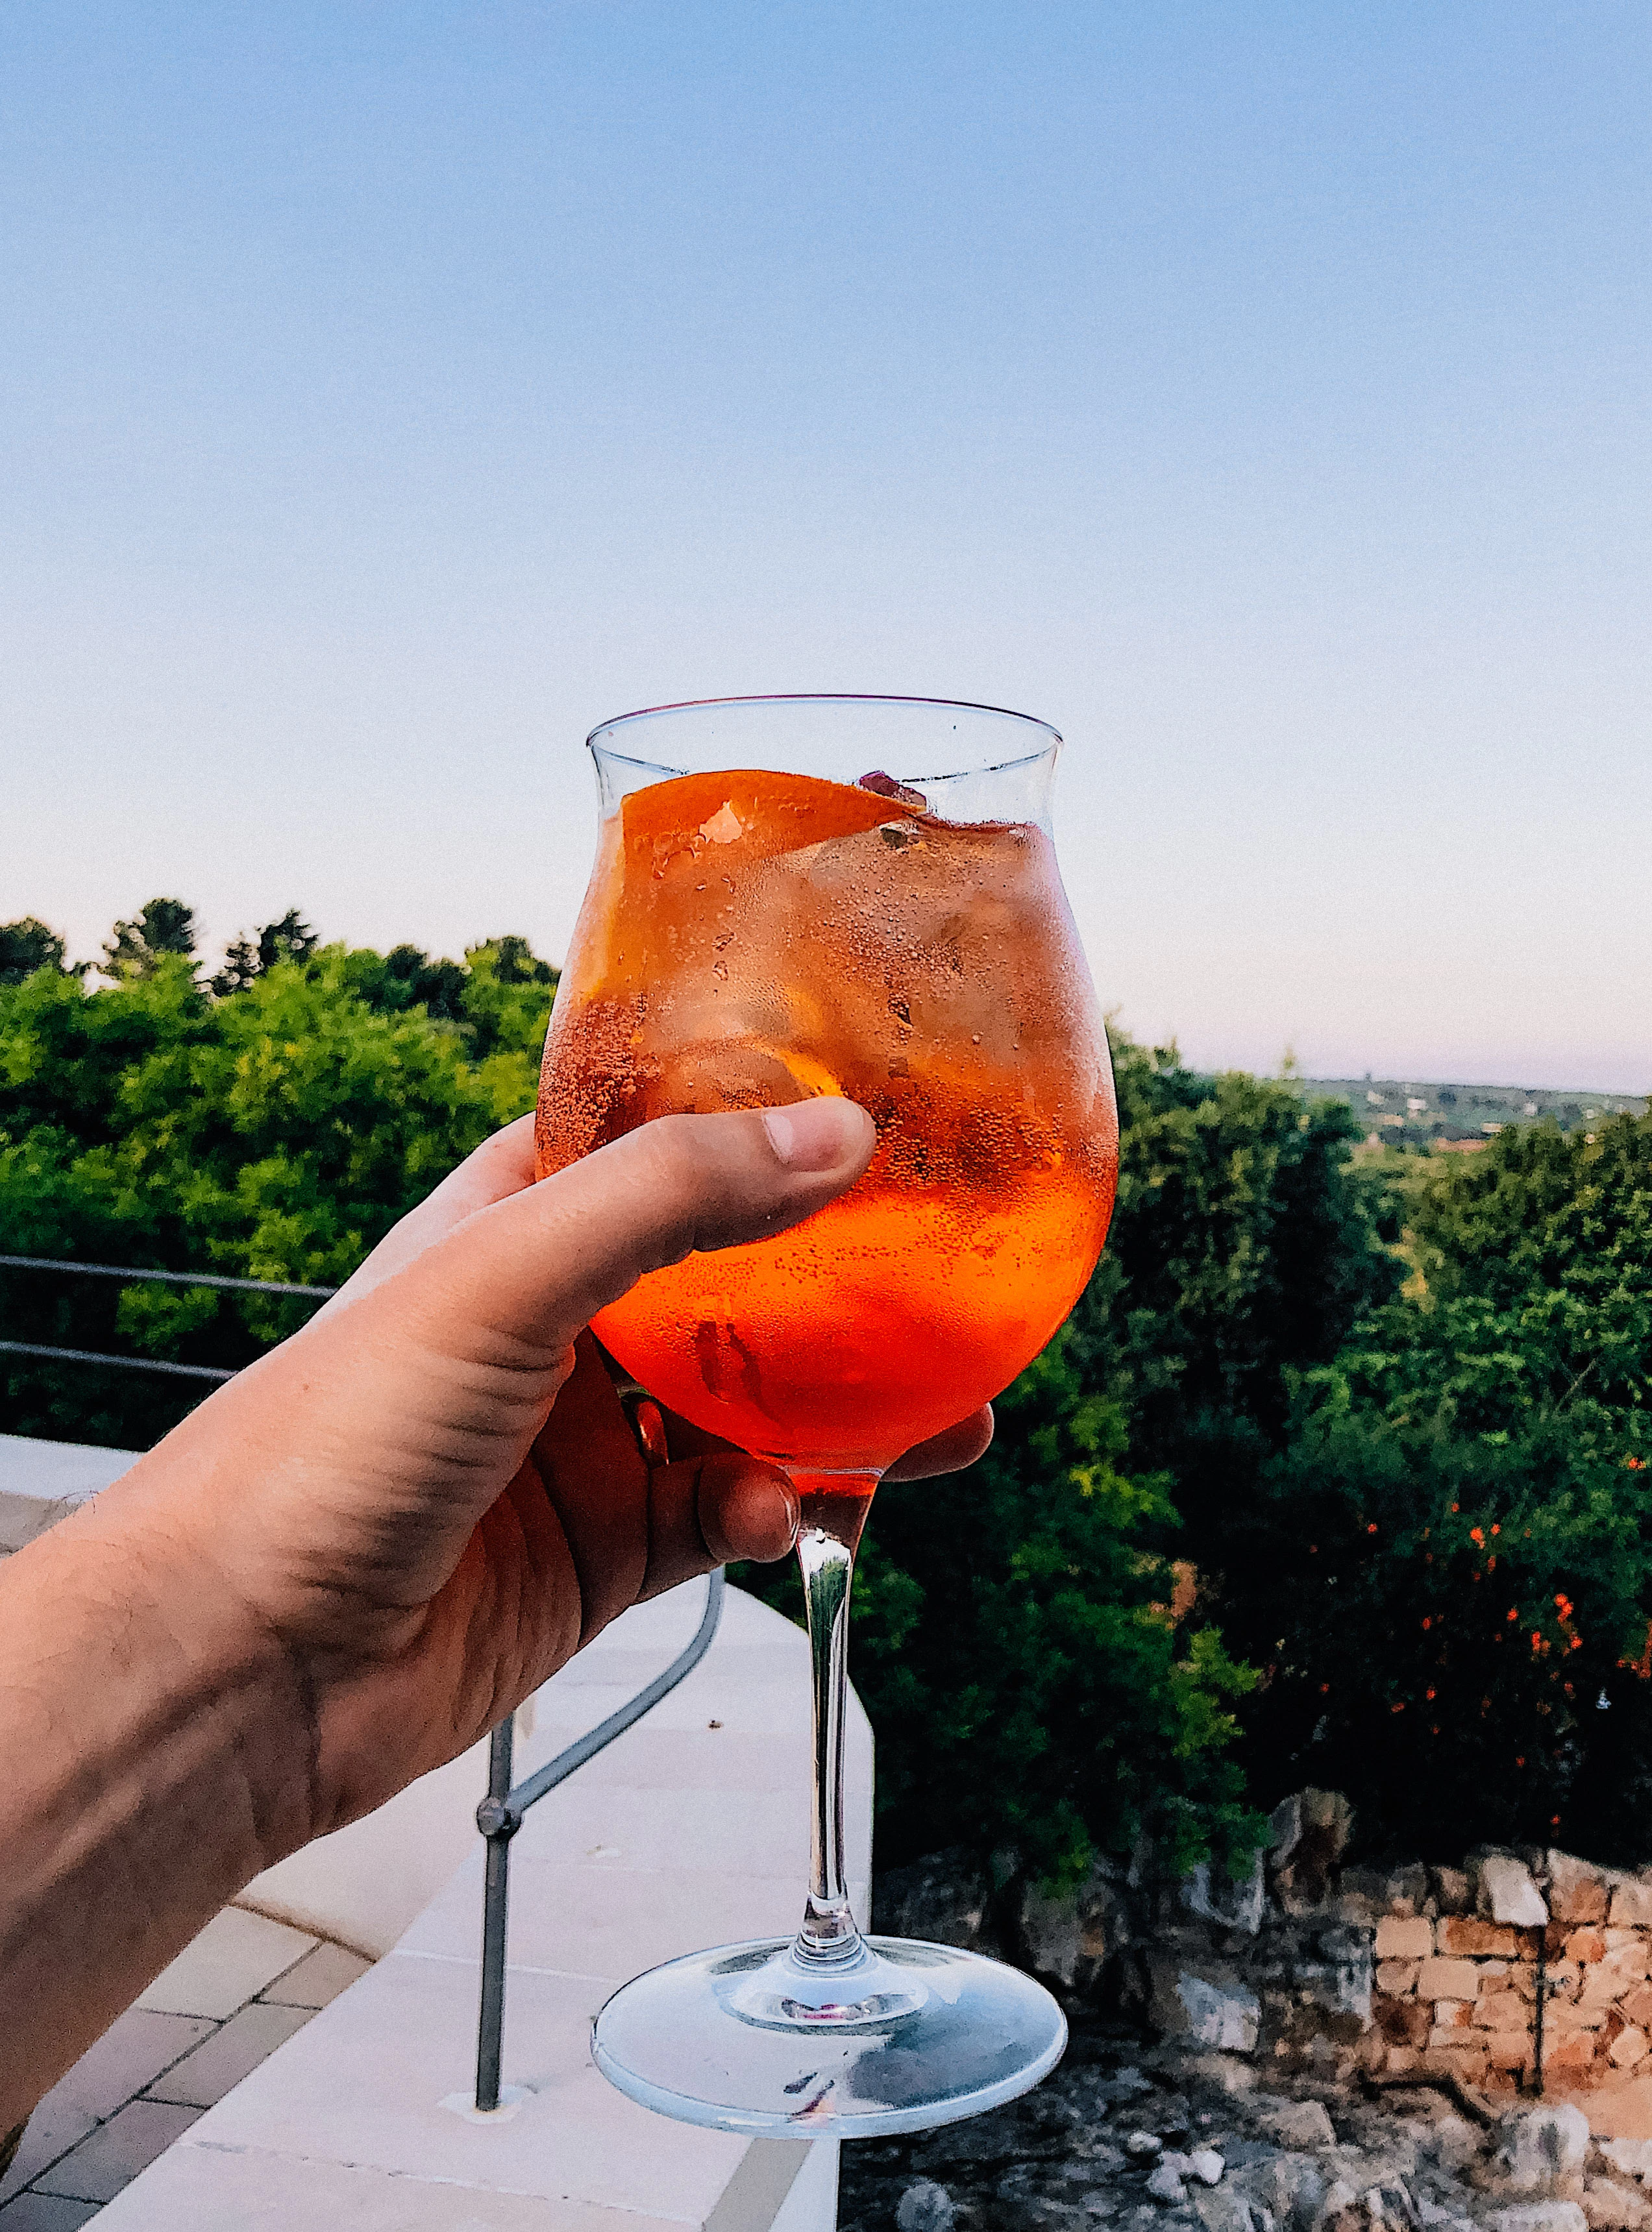 A hand holds out an Aperol spritz, in the background is an Italian landscape.